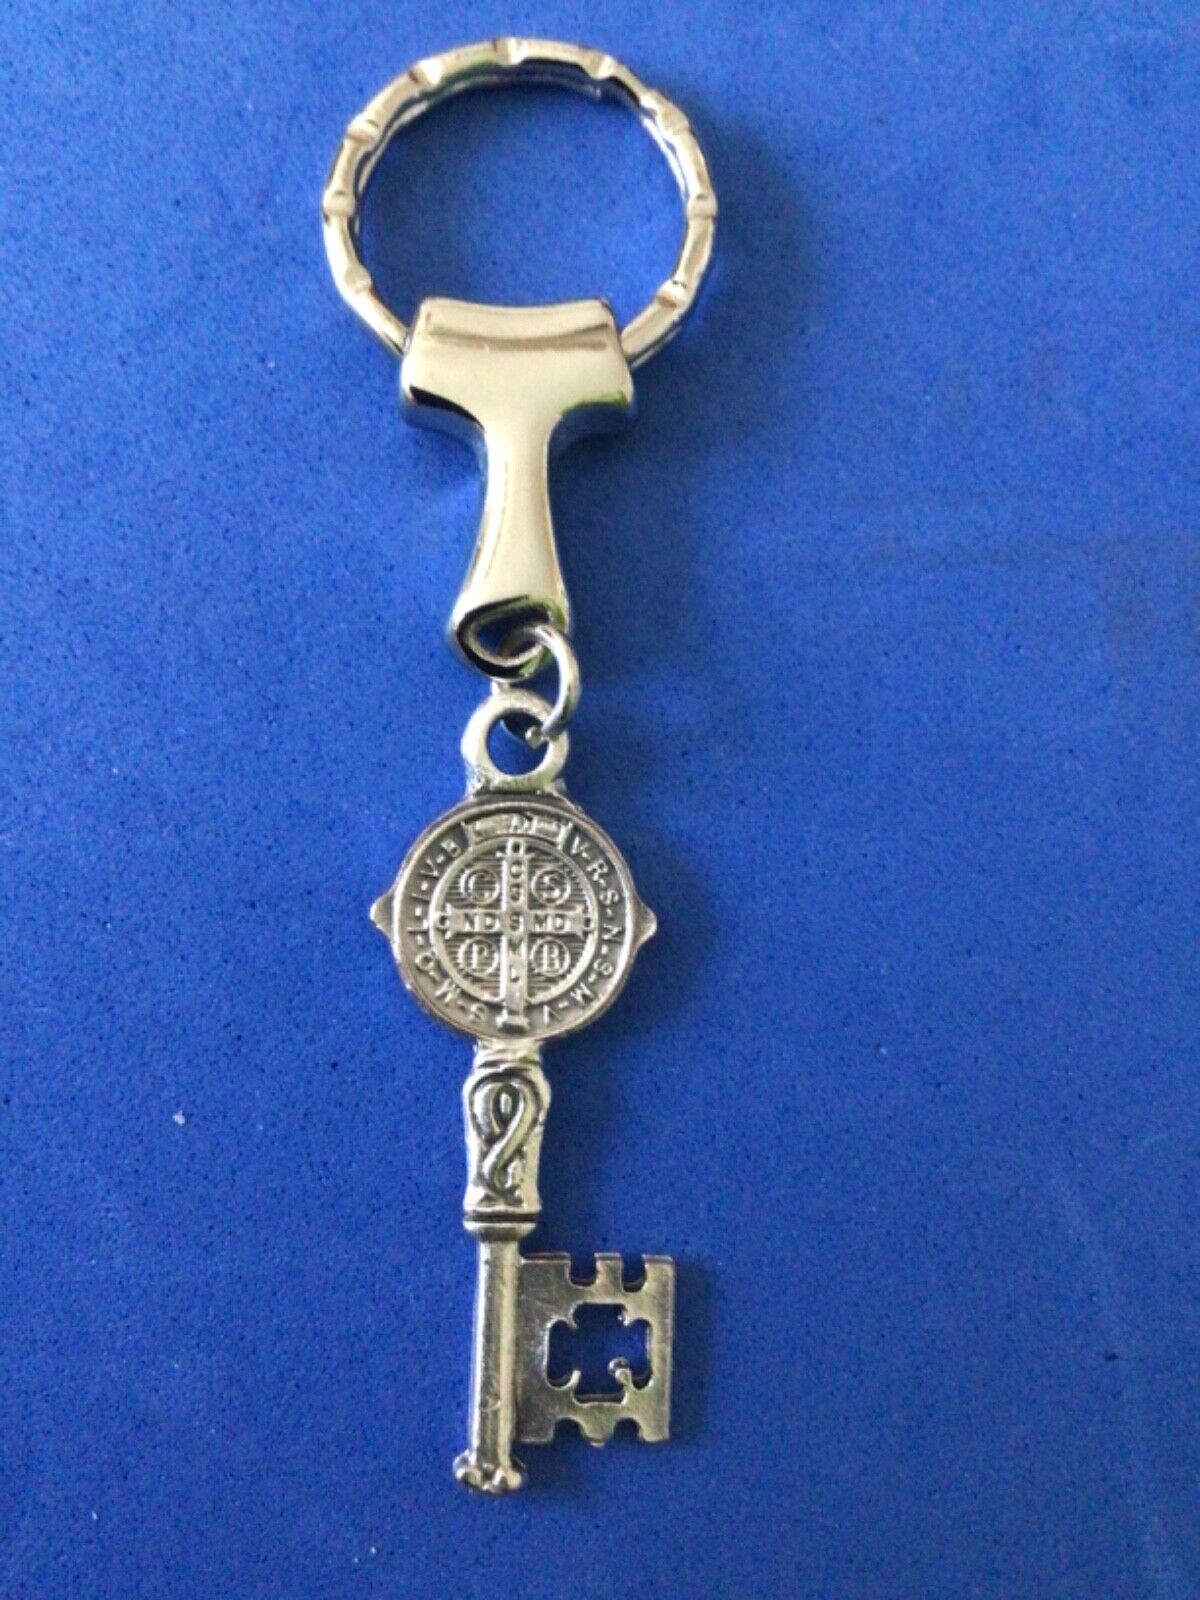 Saint St BENEDICT Key to Heaven Keychain RING Protection Silver Tone Oxidized #2